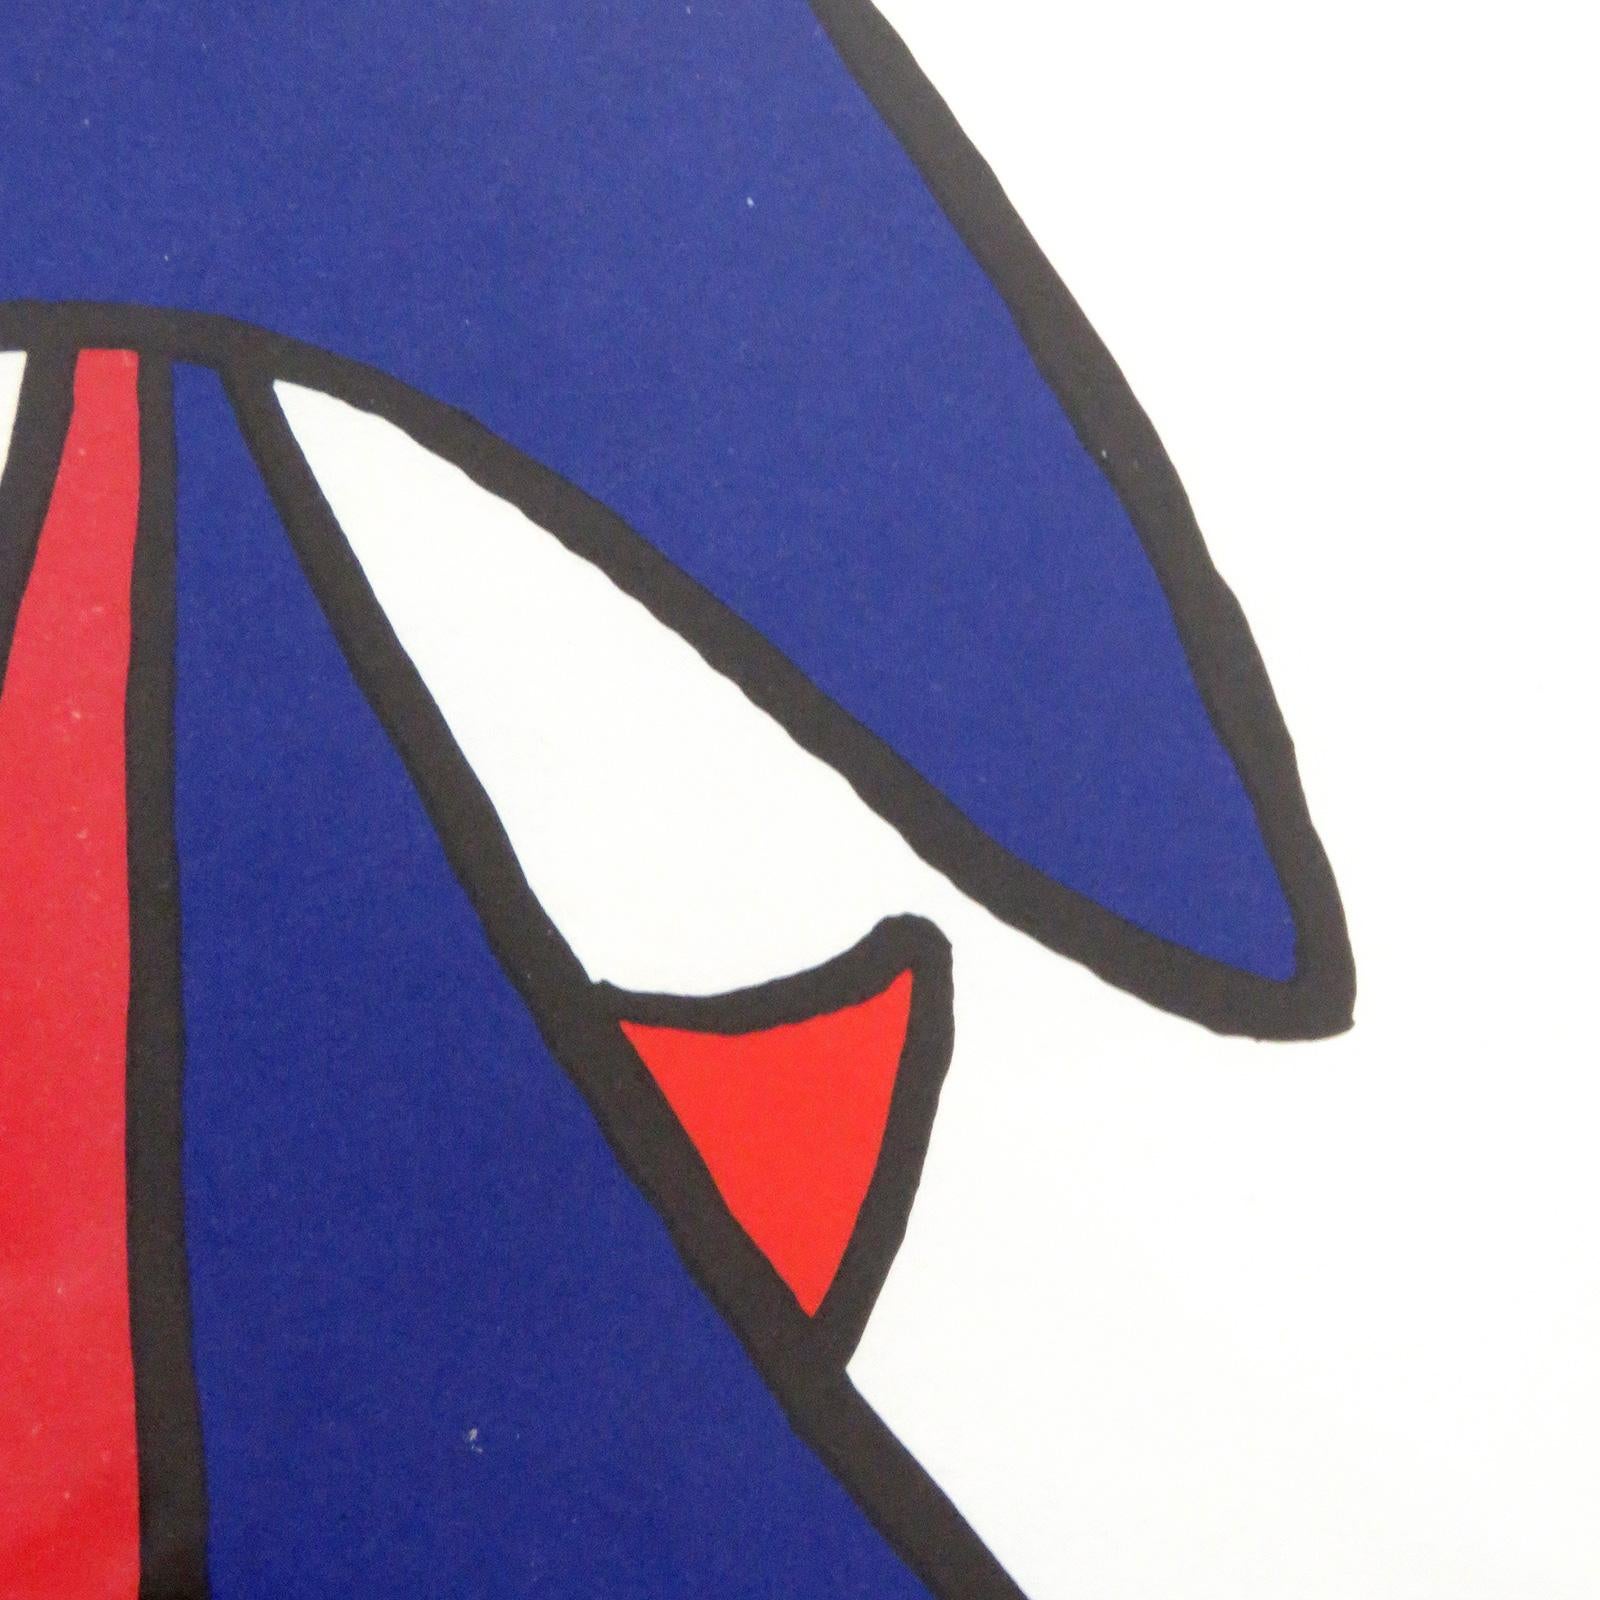 Mid-20th Century Alexander Calder Lithography, 1963